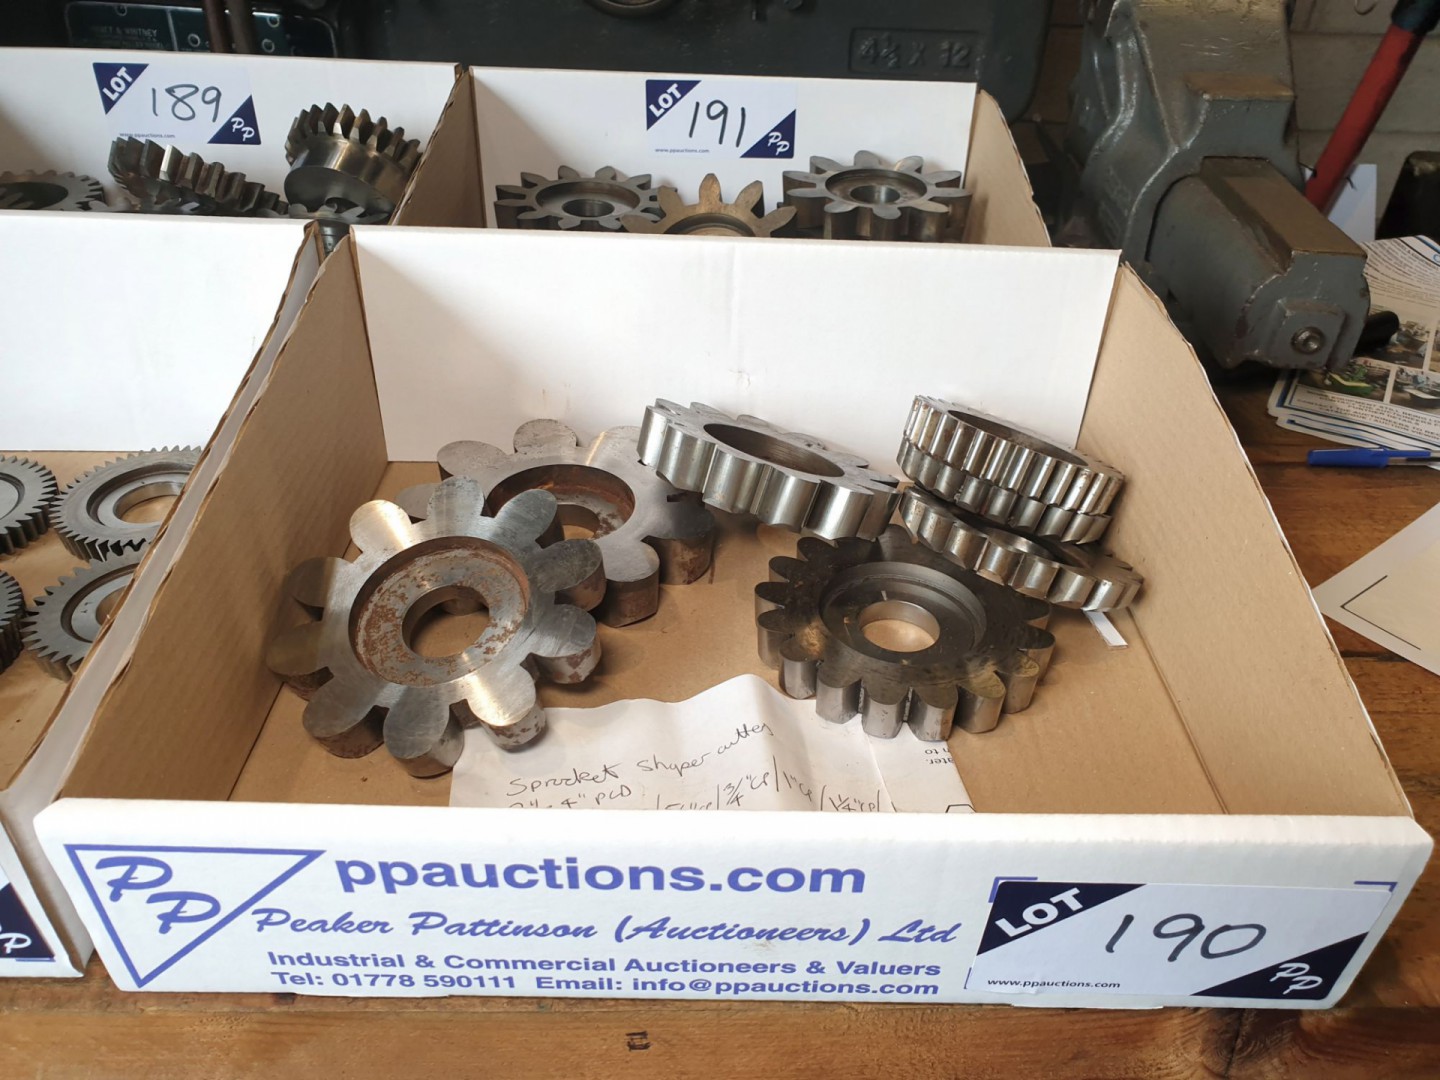 6x various sprocket shaper cutters, 3" & 4" PCD, 3...